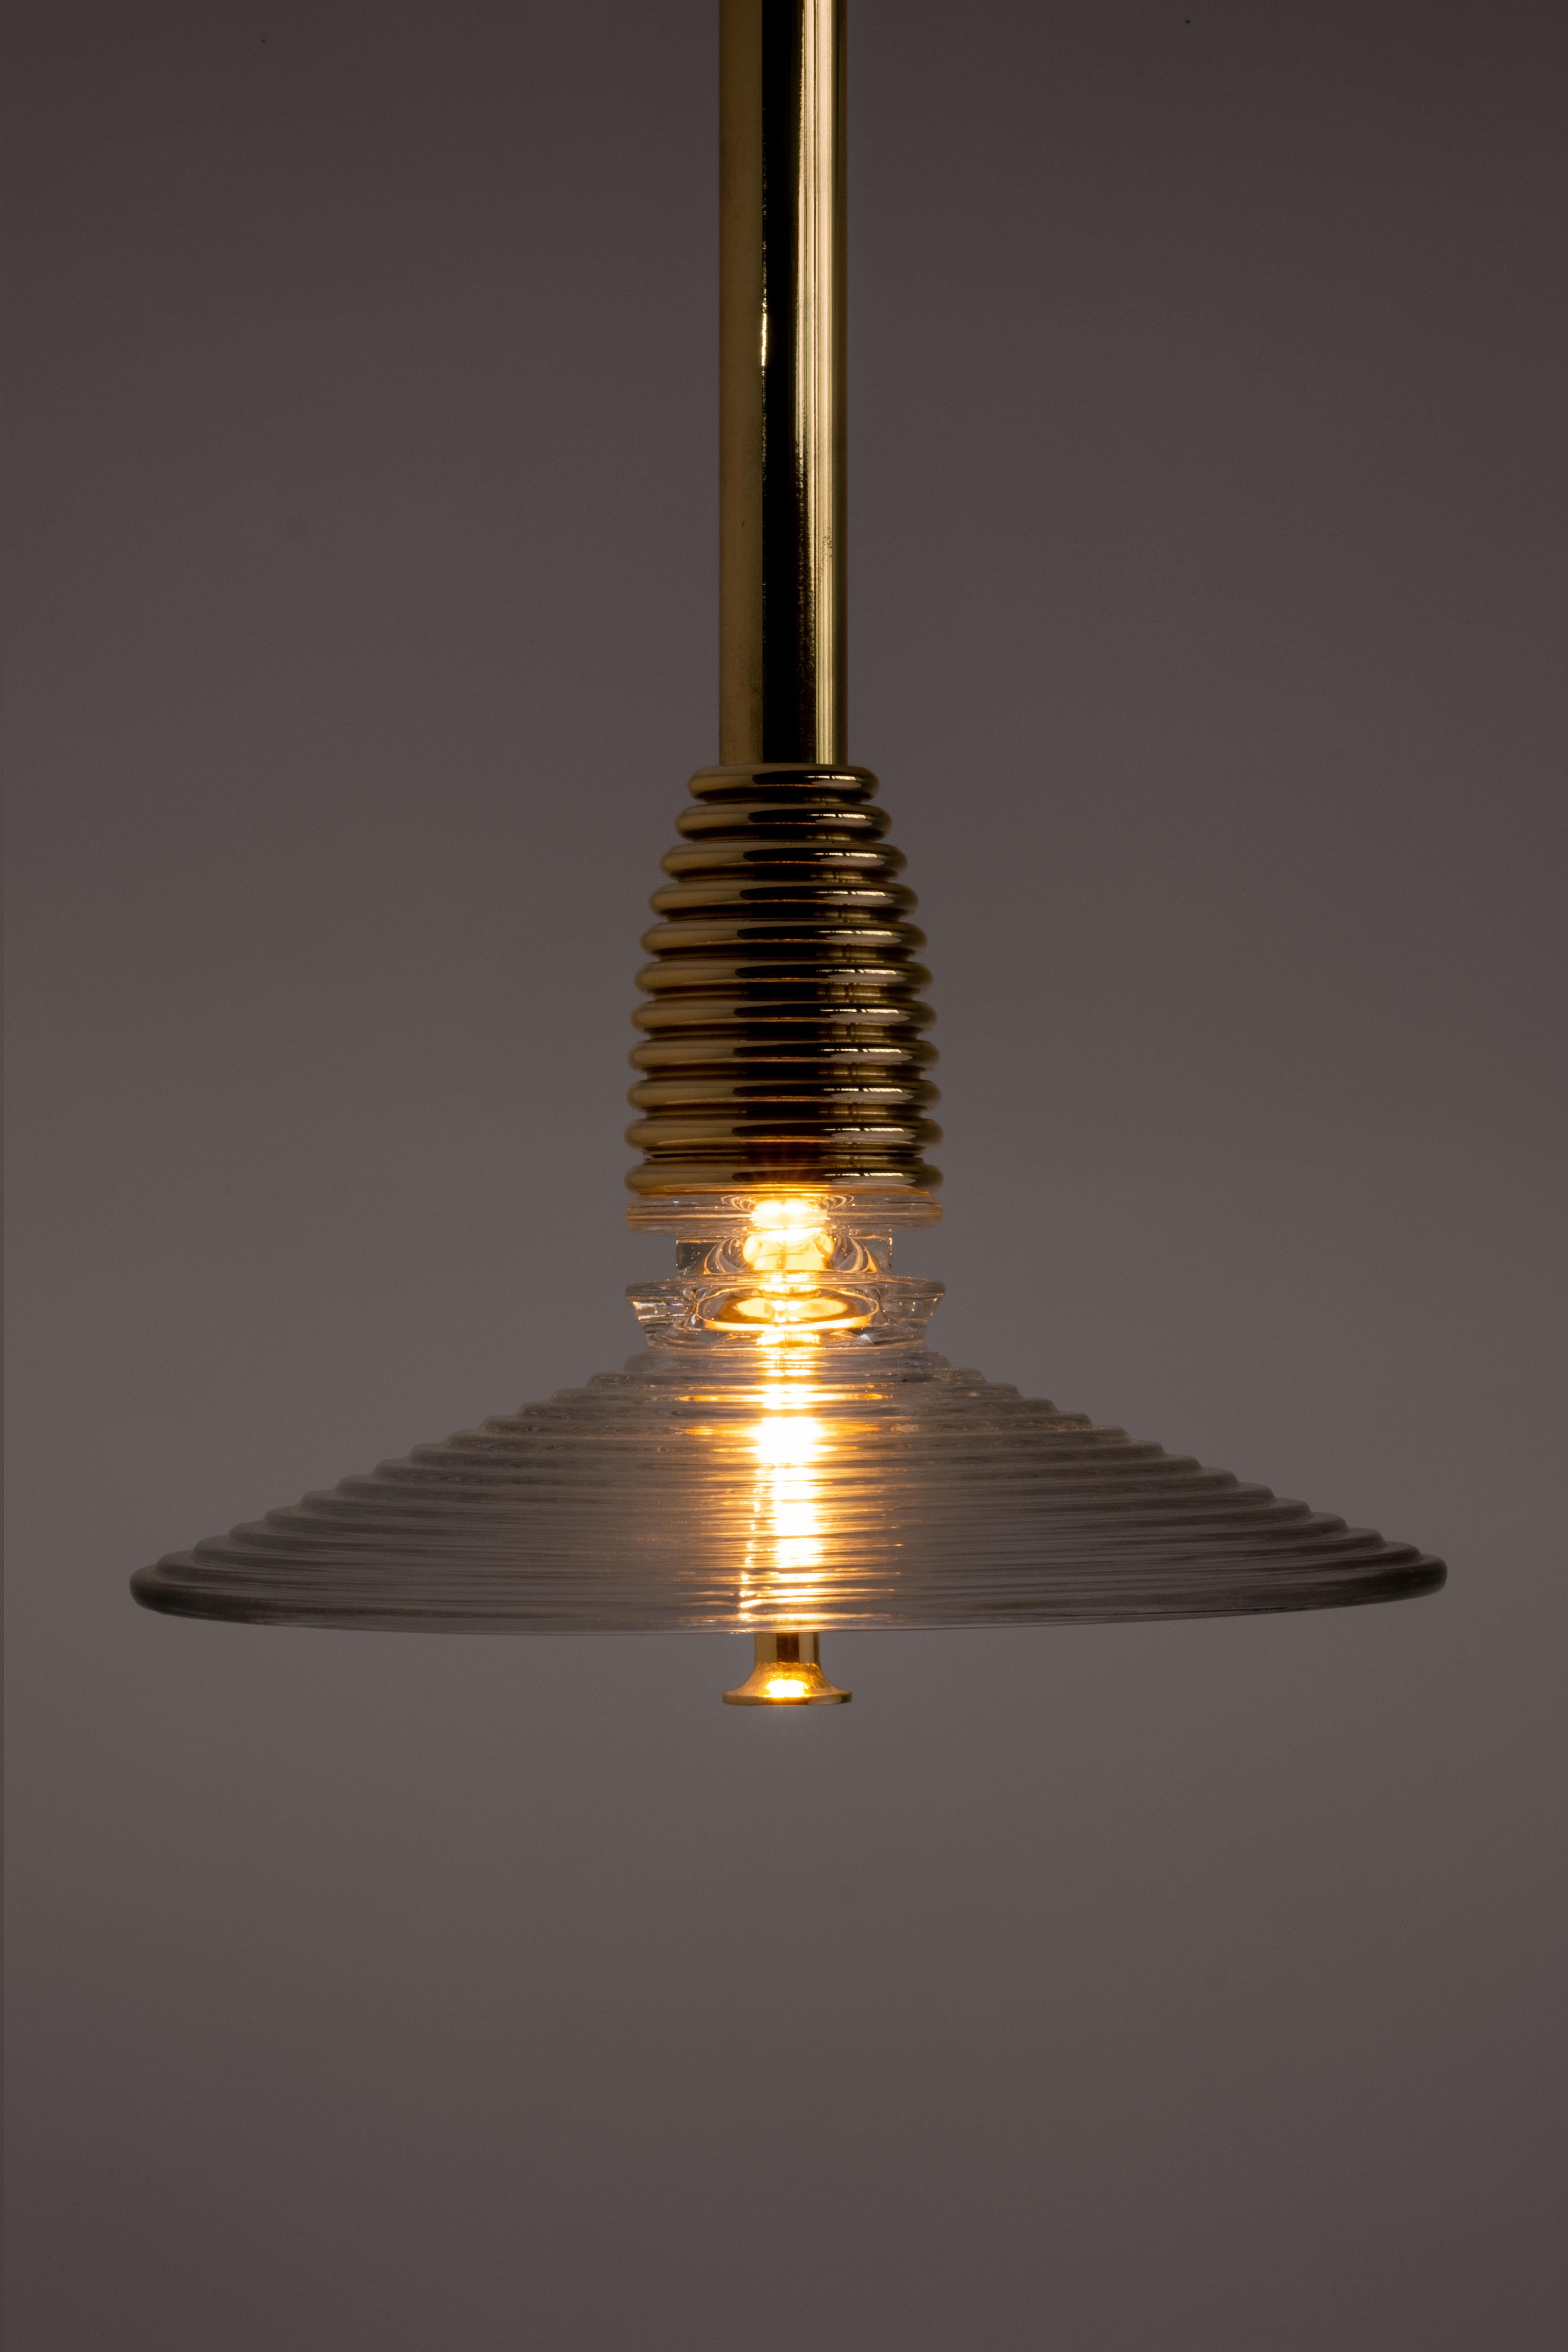 Brass The Insulator 'B' Pendant in polished brass and clear glass by NOVOCASTRIAN deco For Sale